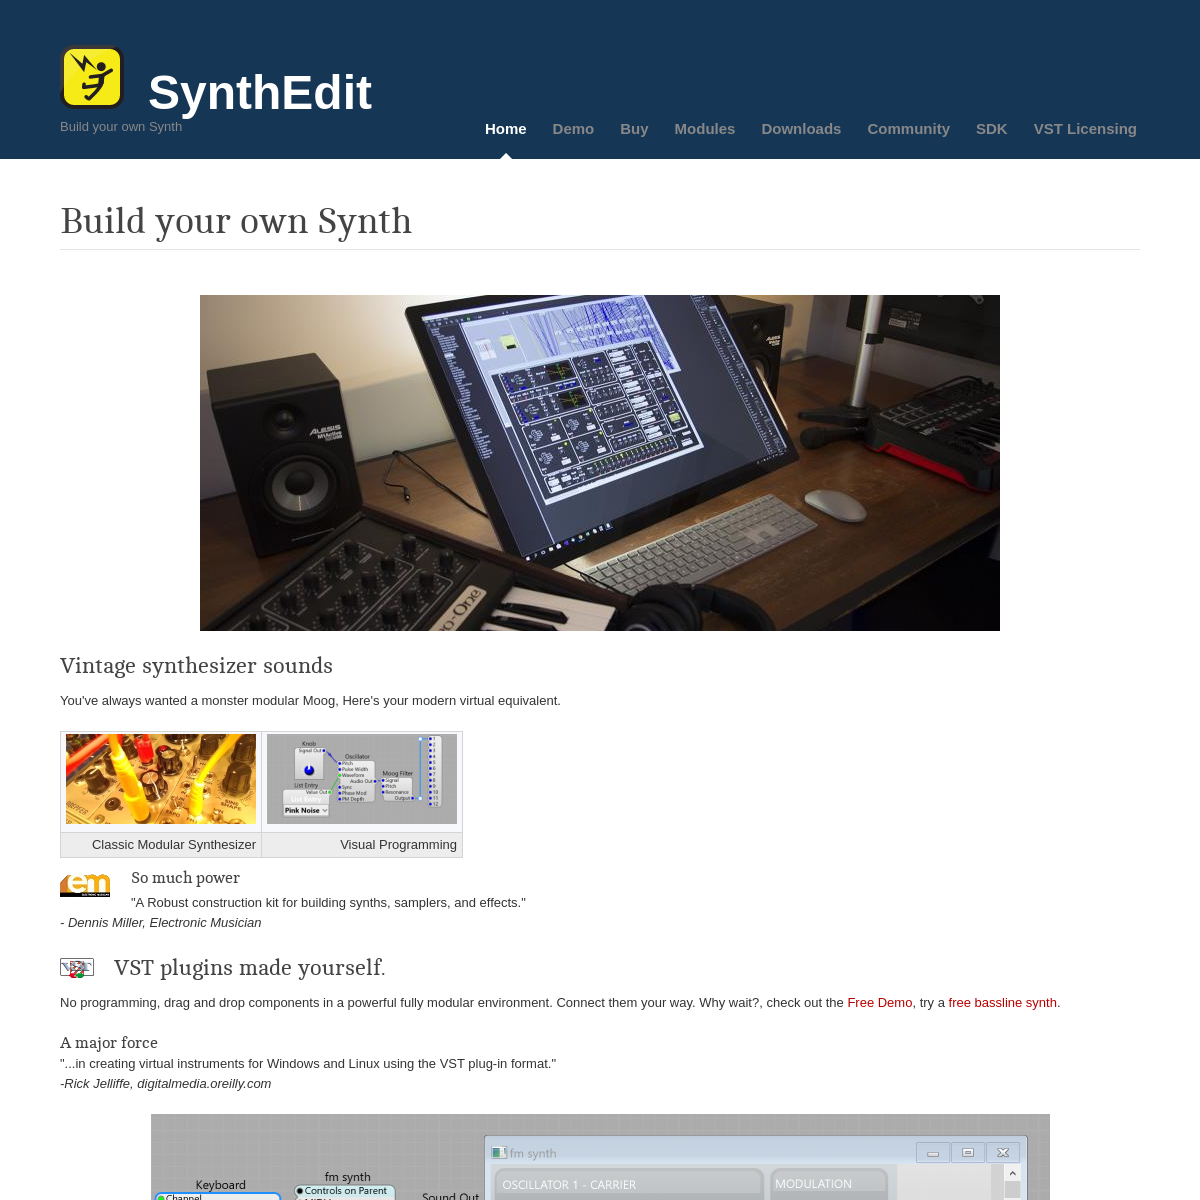 A complete backup of synthedit.com